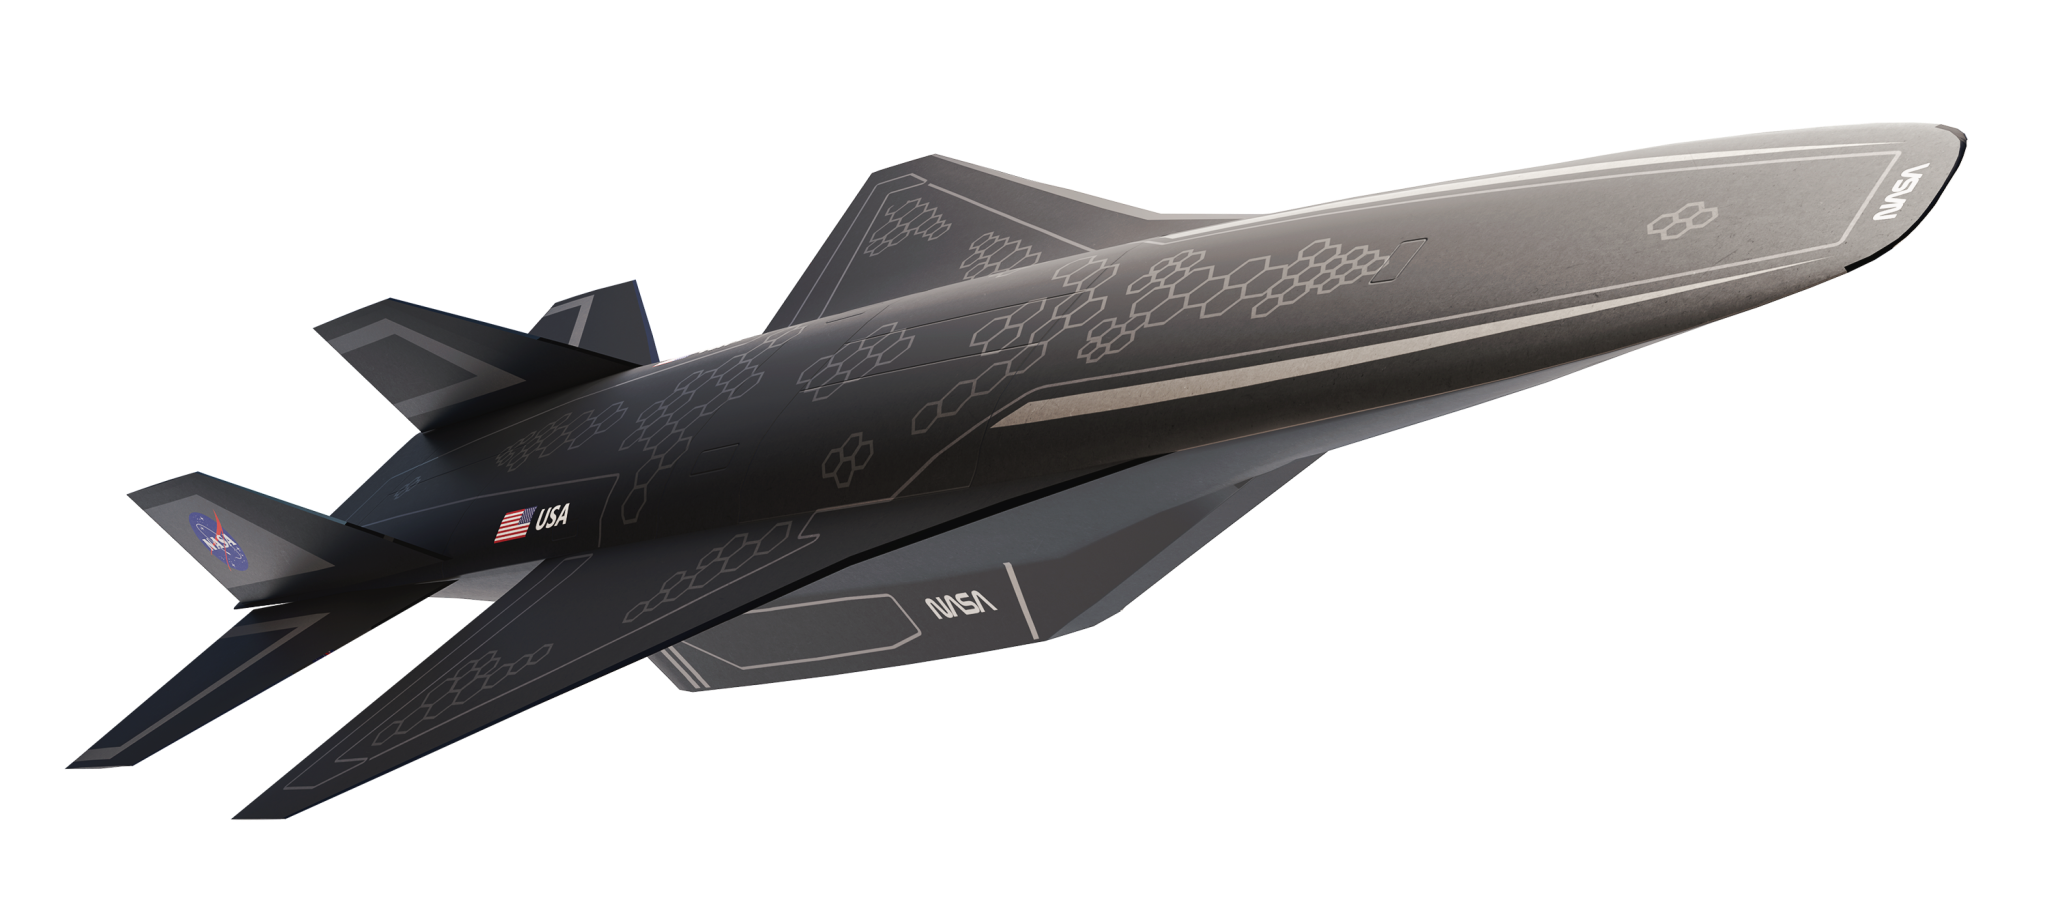 An illustration of a hypersonic vehicle. The vehicle is skinny, long, and somewhat rectangular from overhead with delta wings. It is covered in black tiles and has the NASA logotype and logo.